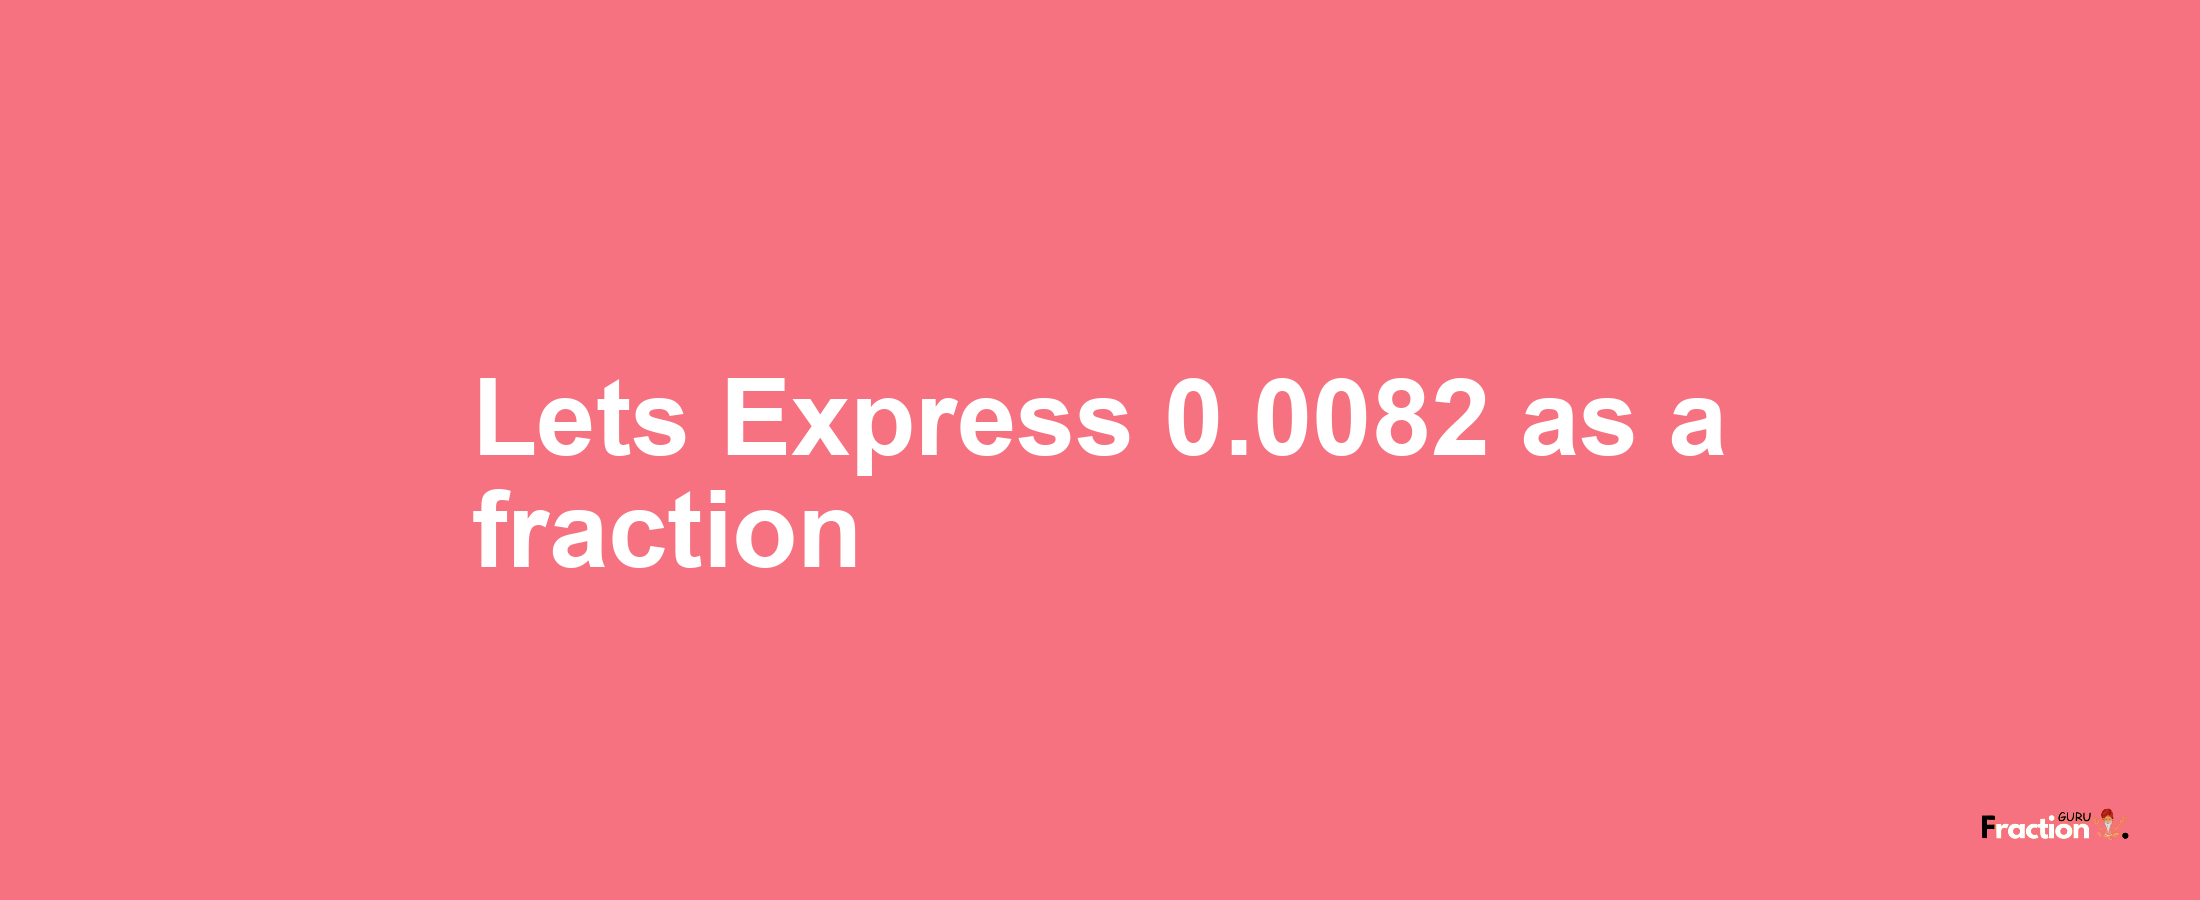 Lets Express 0.0082 as afraction